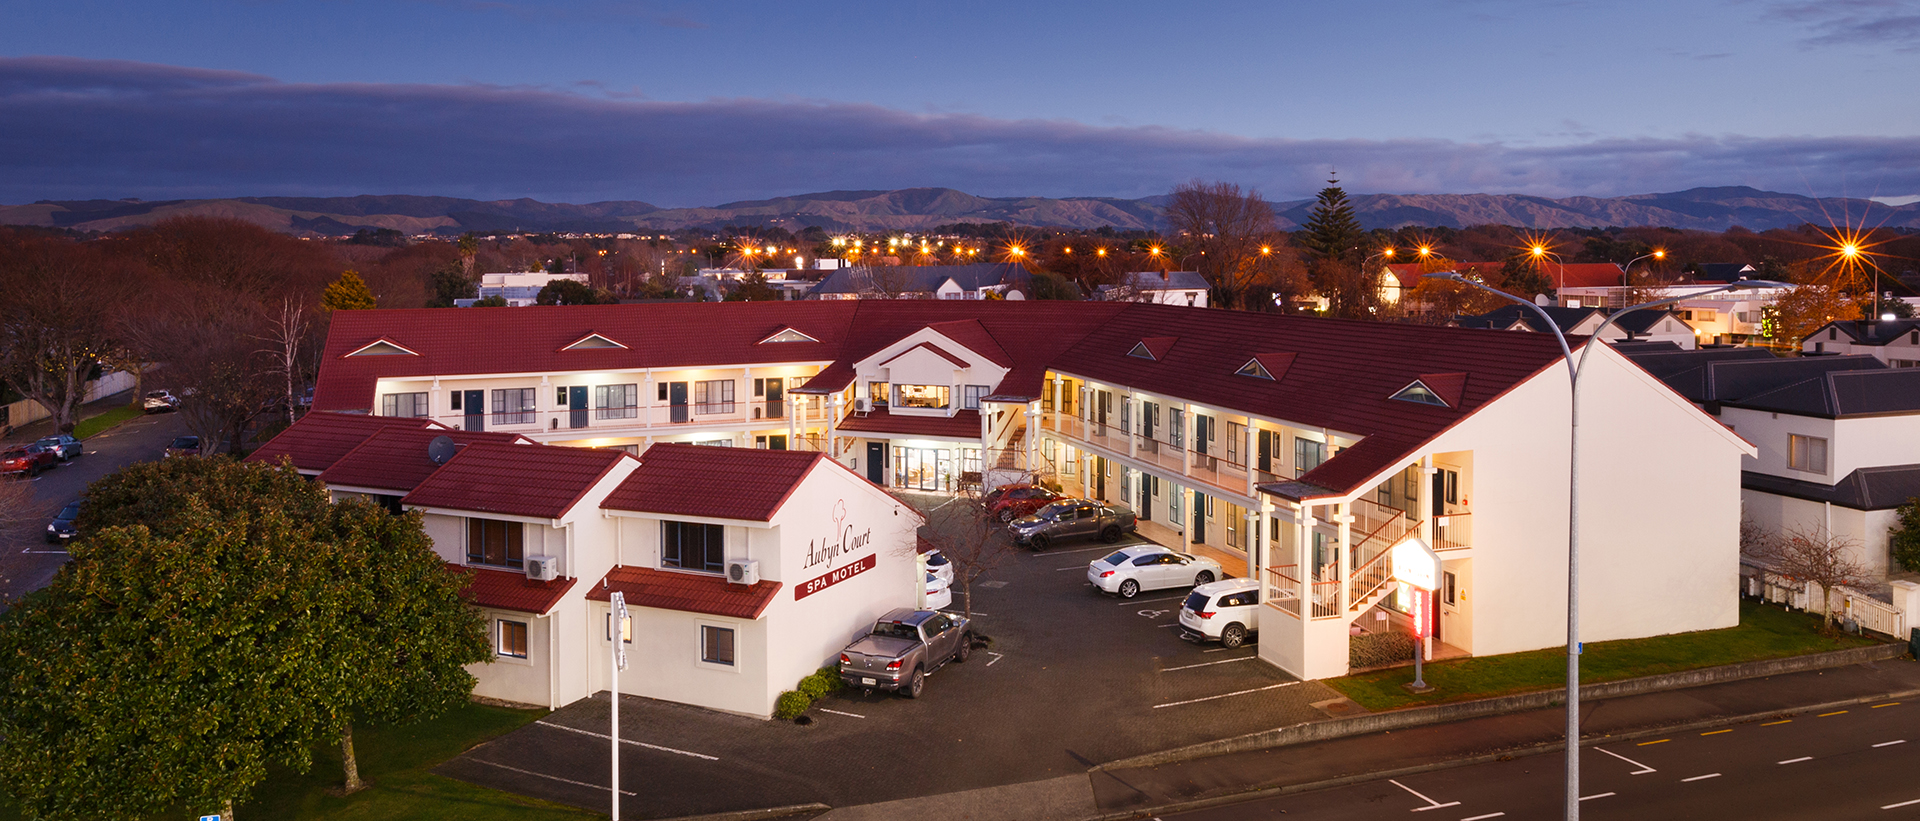 Facilities and Services at Aubyn Court Spa Motel